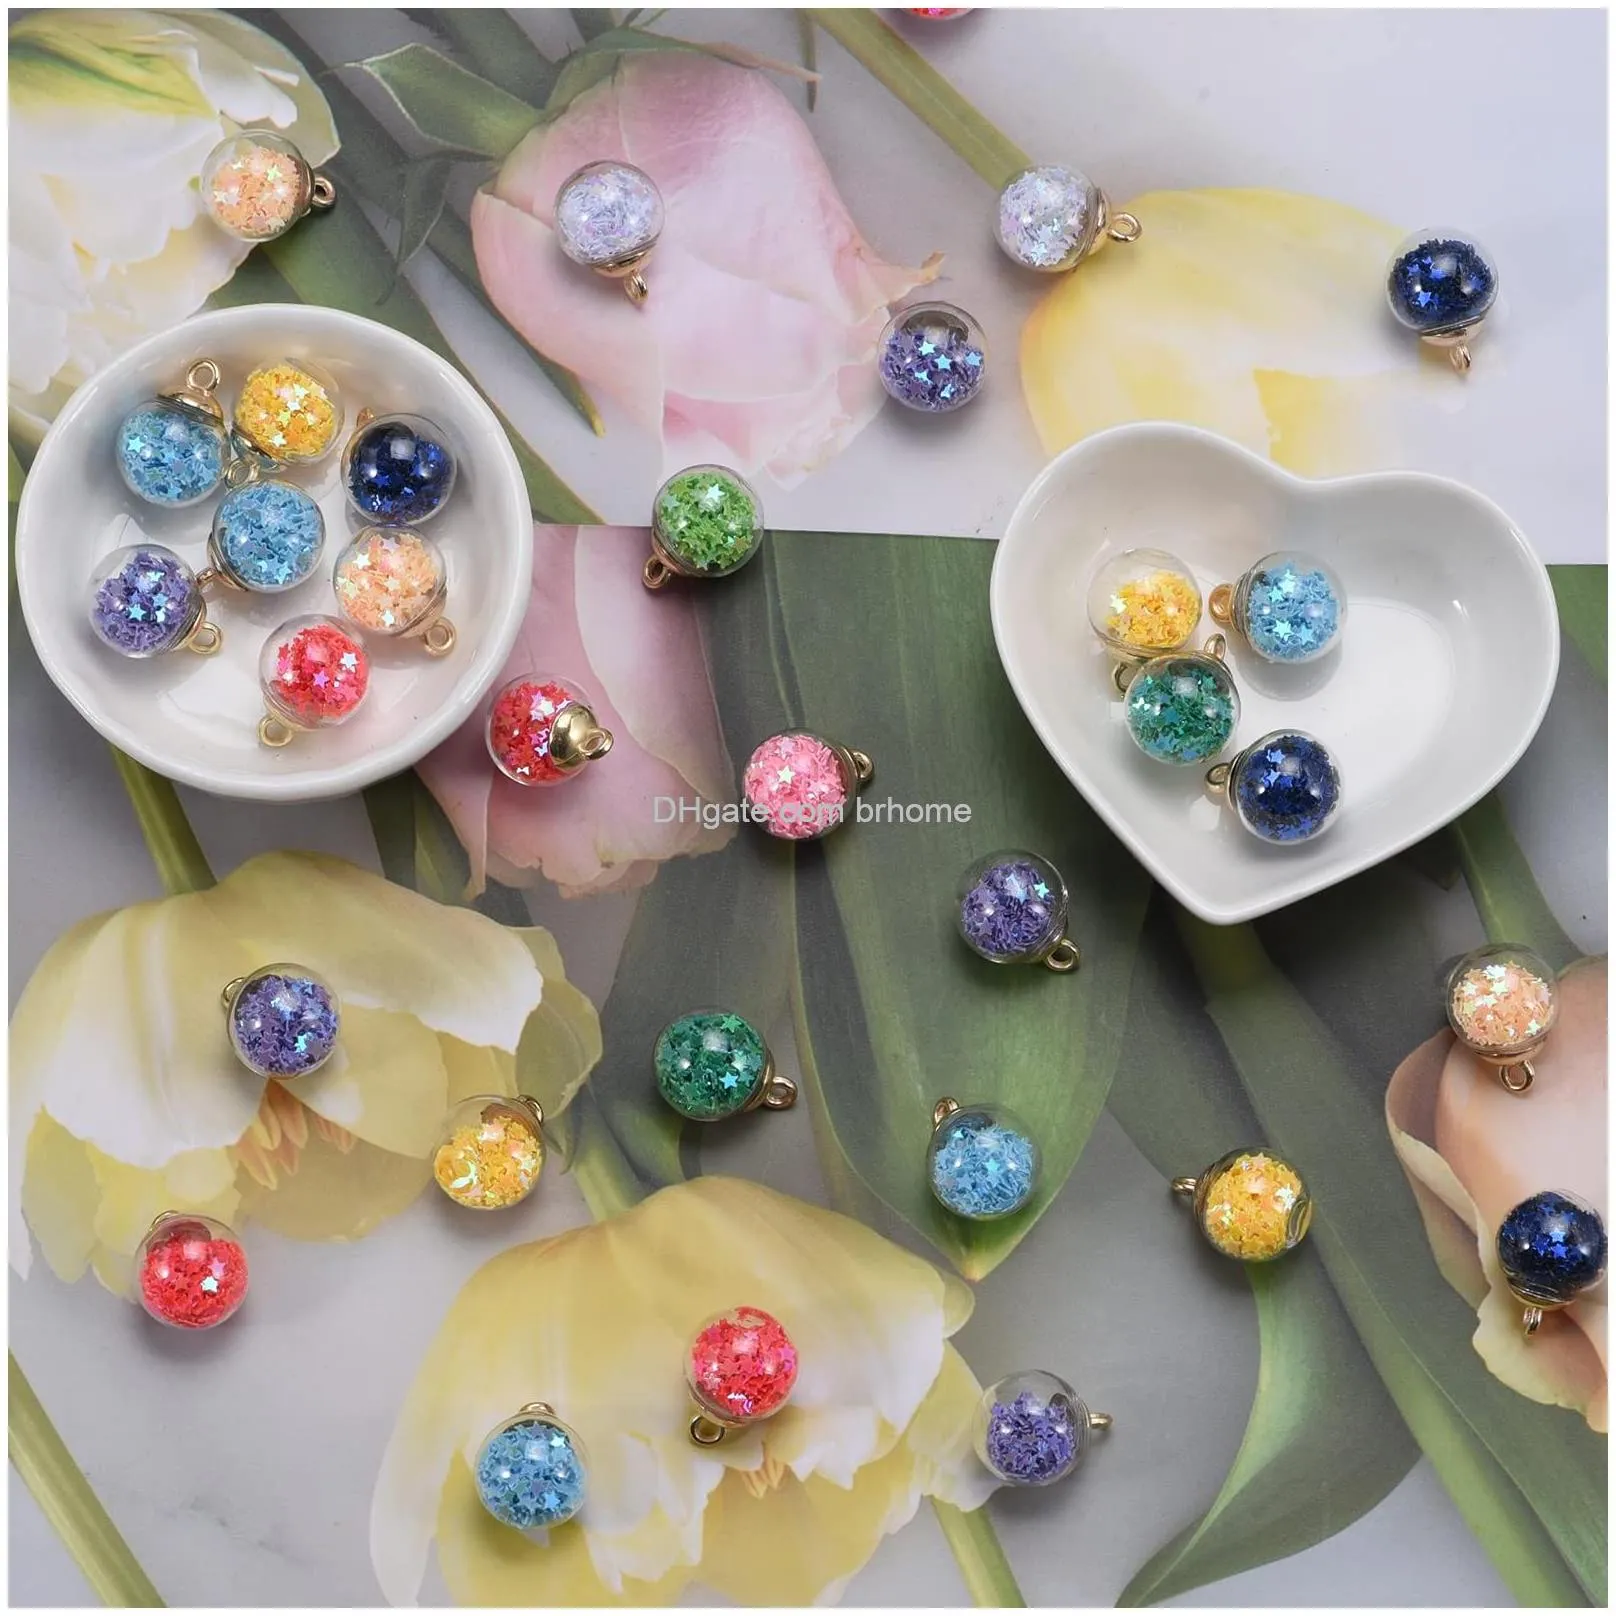 colorful mixed glass ball with stone tiny shiny rhinestone beads pendant craft accessory diy necklace bracelet earring craft jewelry making supply 16mm a400